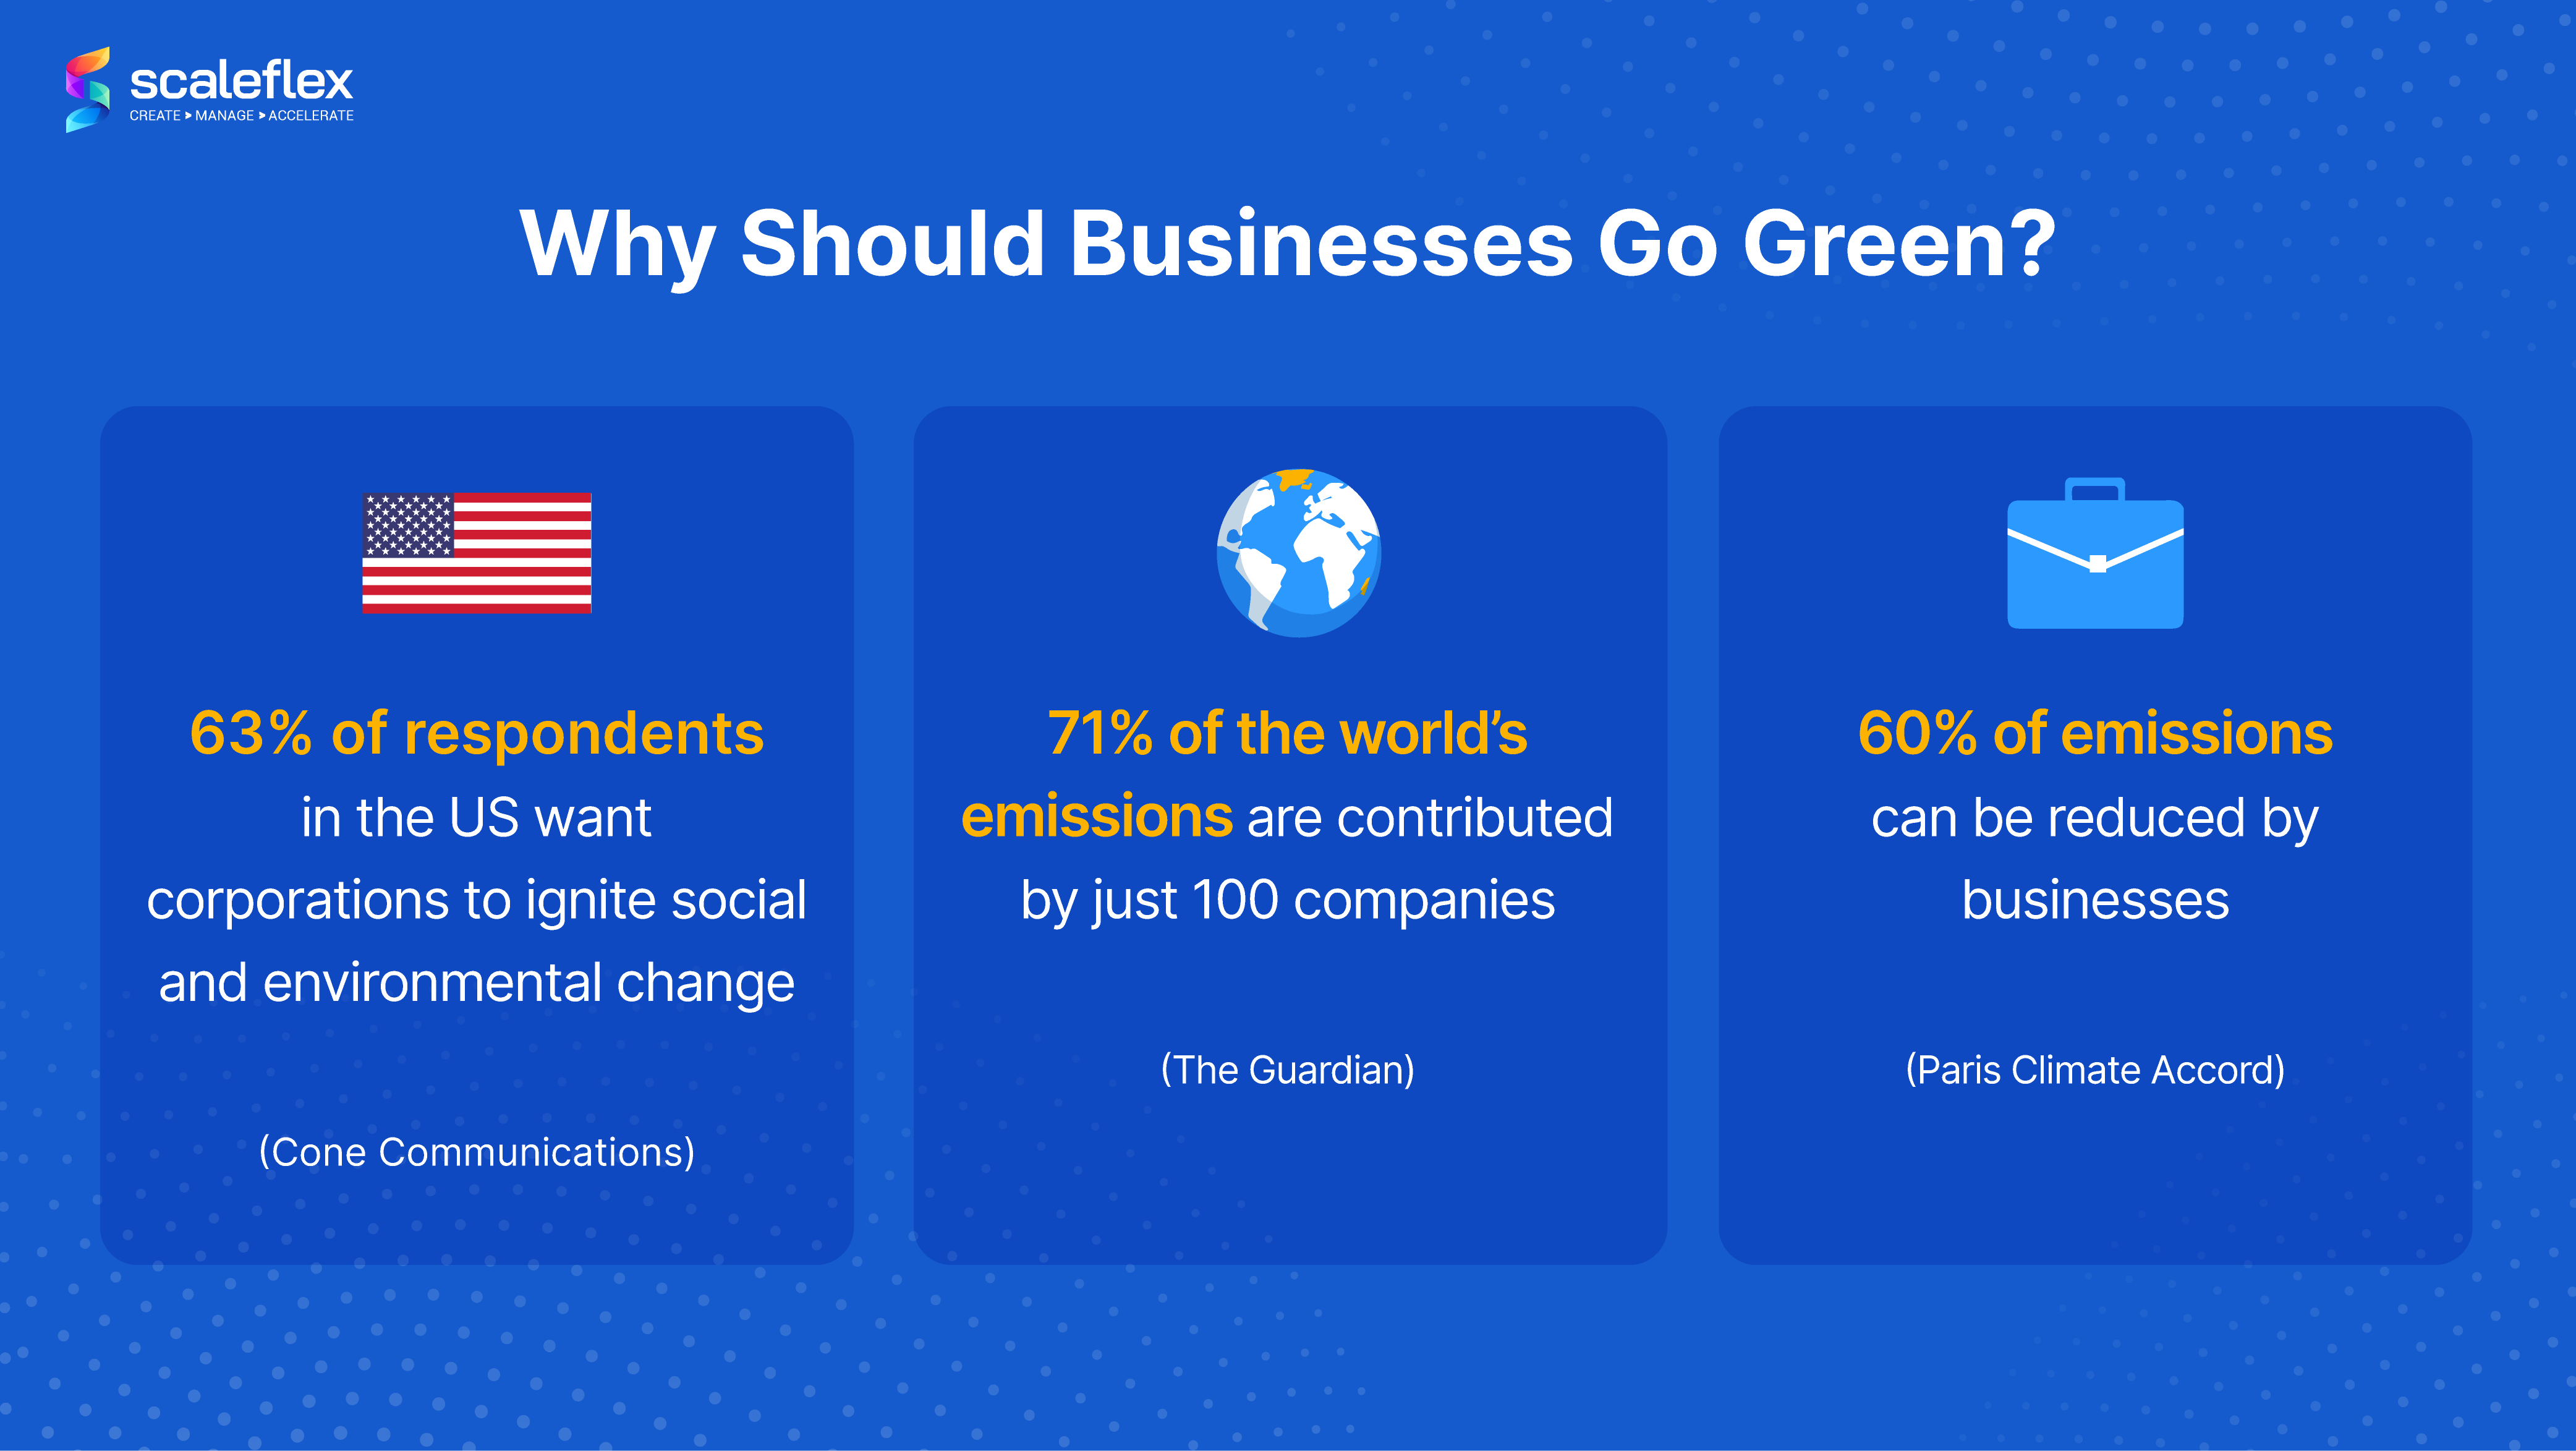 Statistics to show why businesses should go green